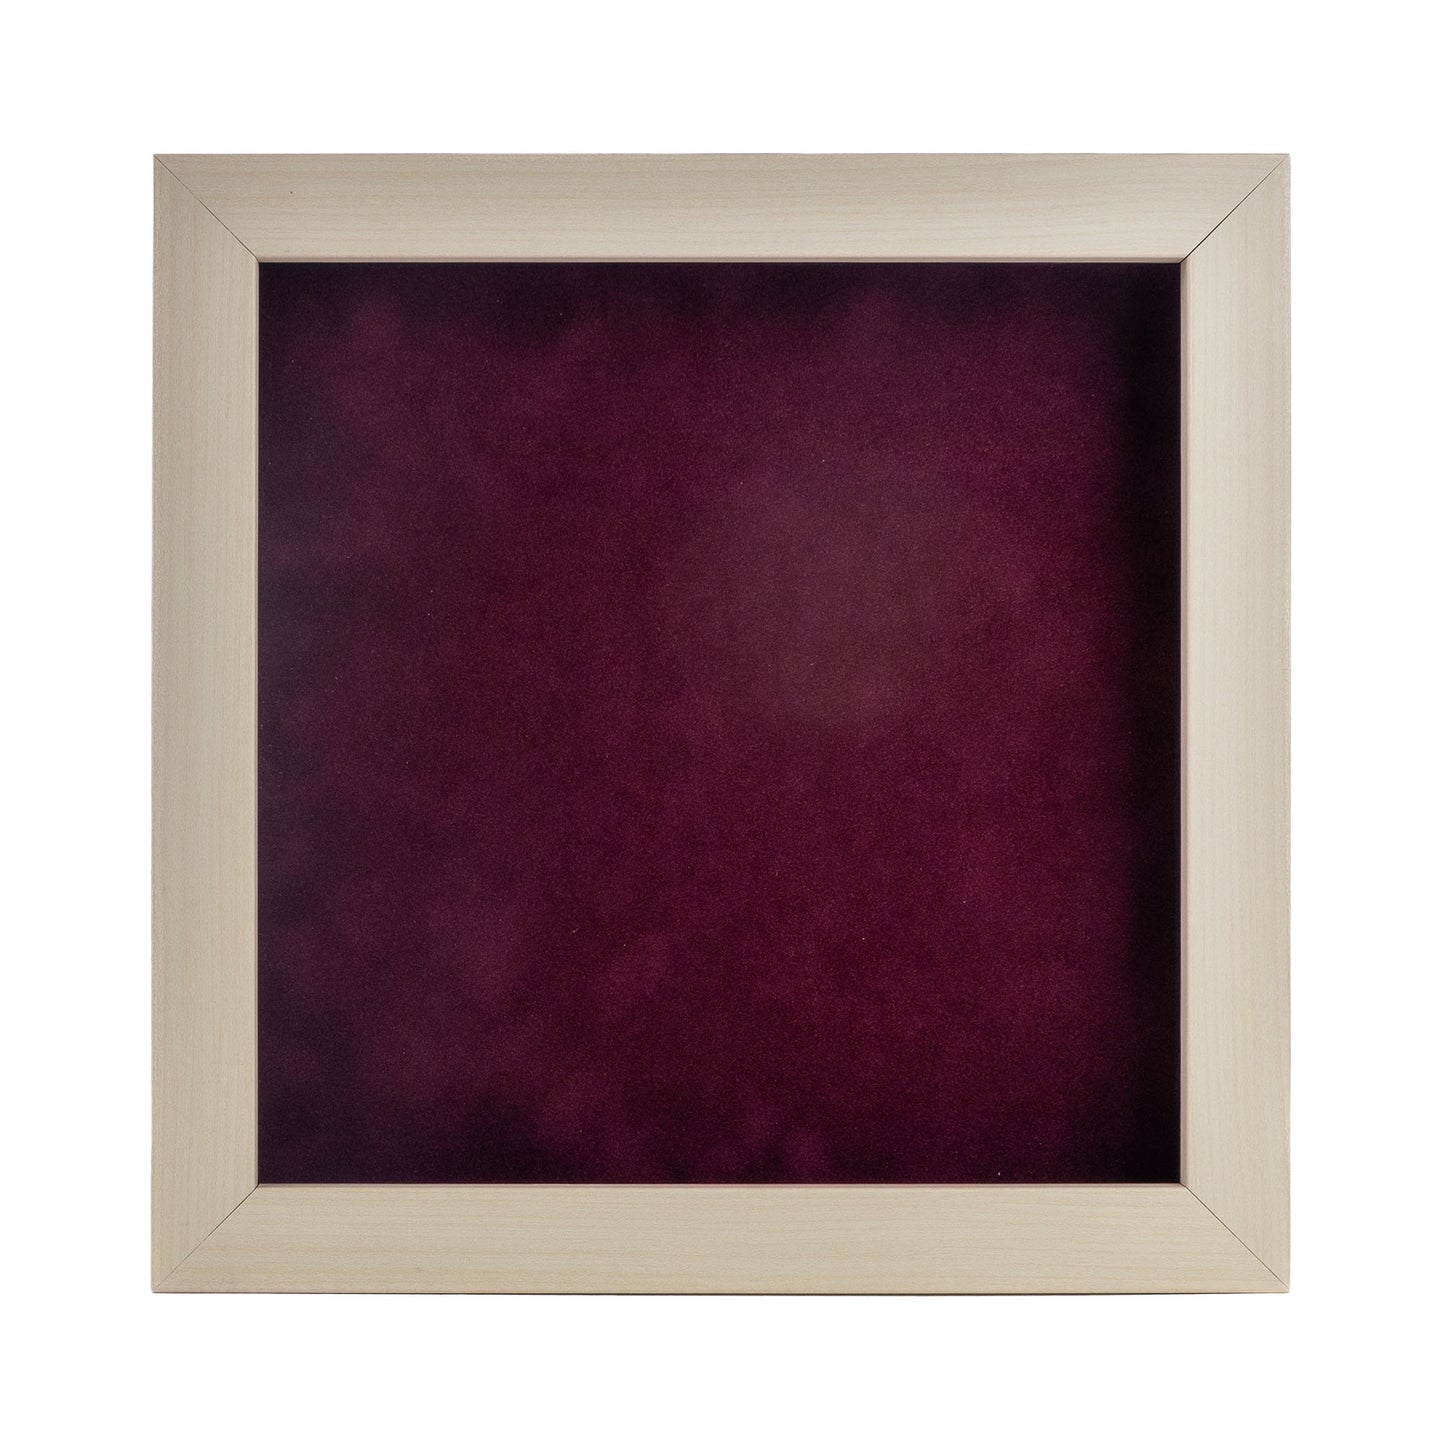 White Washed Shadow Box Frame With Dark Berry Acid-Free Suede Backing